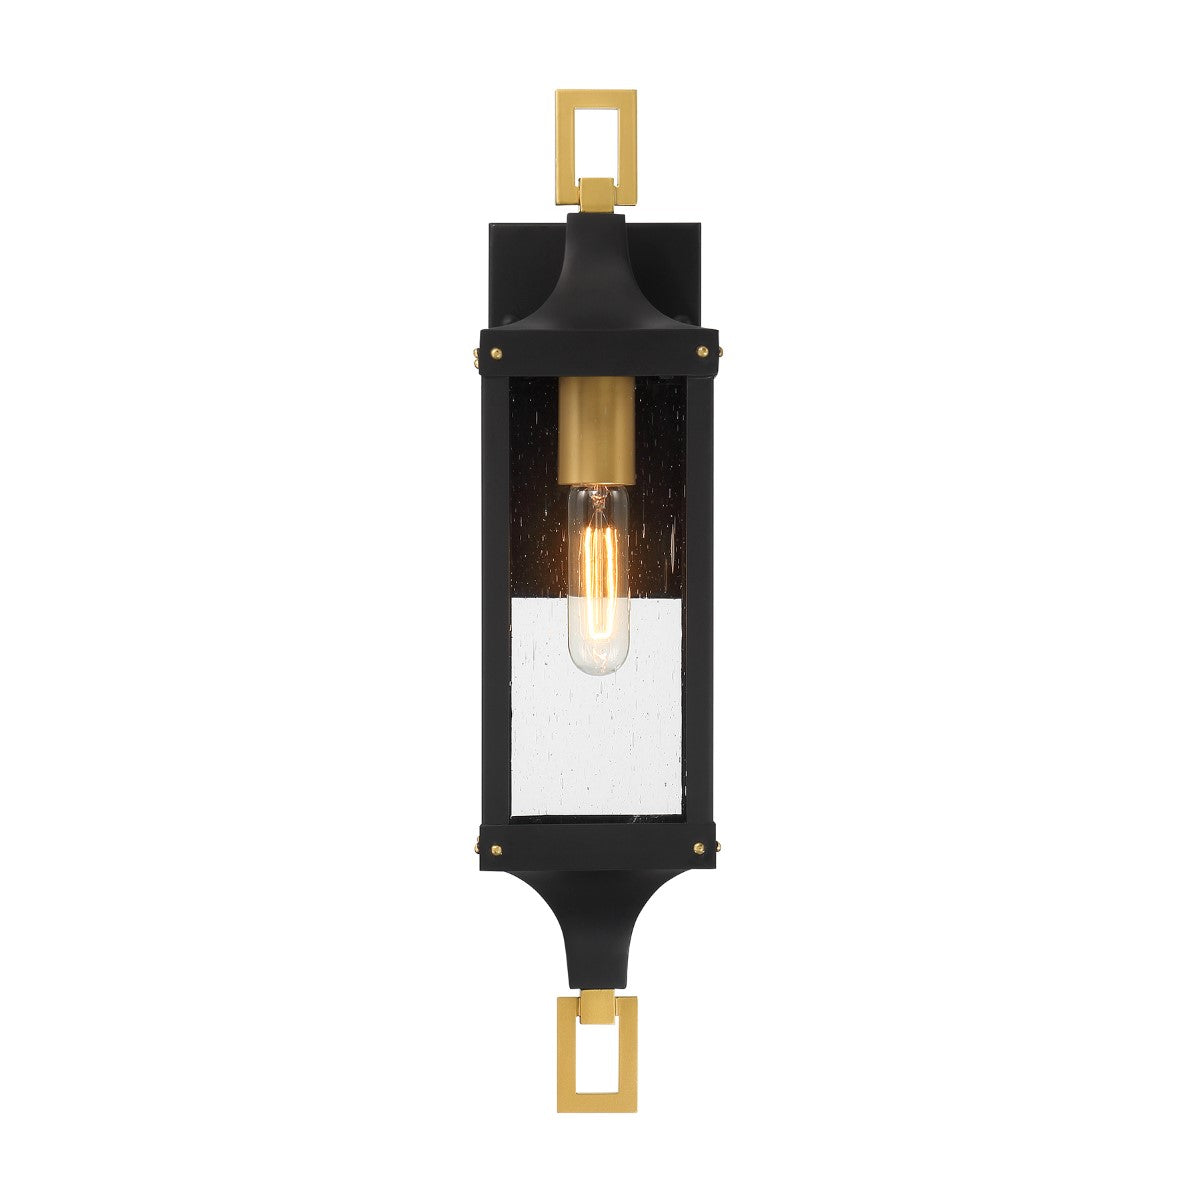 Glendale 21 in. Outdoor Wall Lantern Matte Black and Weathered Brushed Brass Finish - Bees Lighting